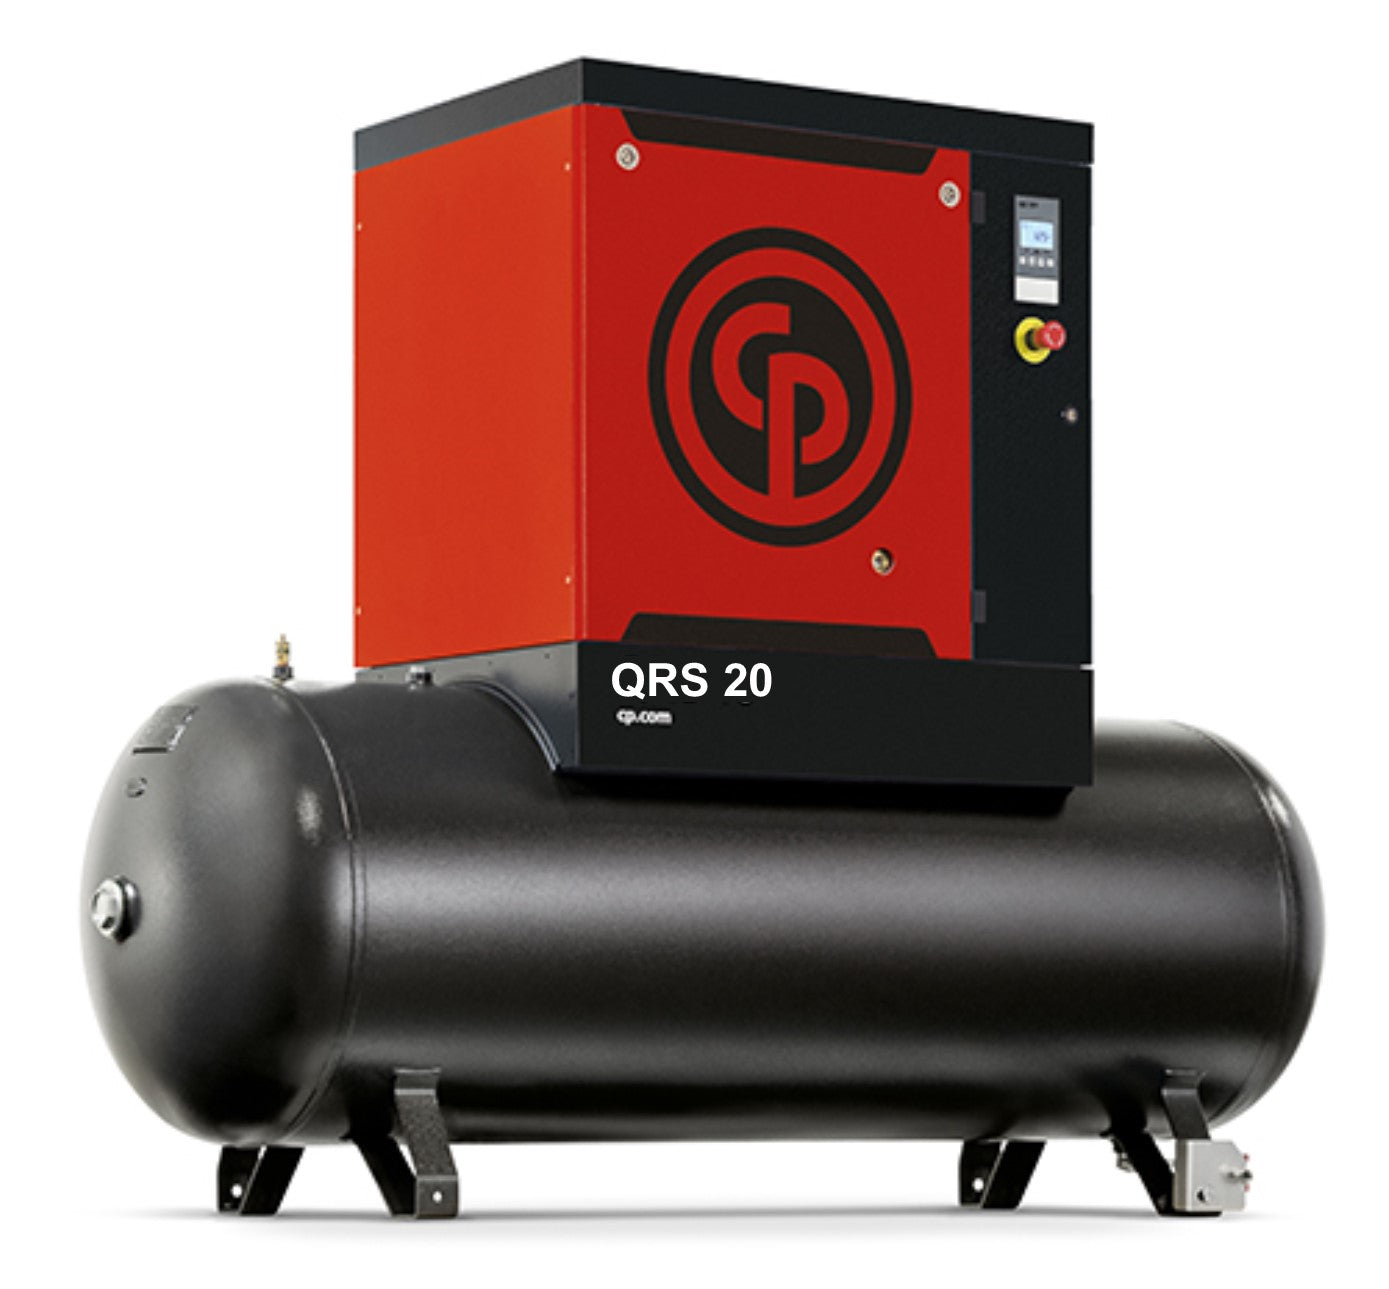 Chicago Pneumatic QRS 30 HP Tank Mount Rotary Screw Air Compressor | 113.8 CFM@125 PSI, 208-230/460 volt, 3 Phase | 4152027028